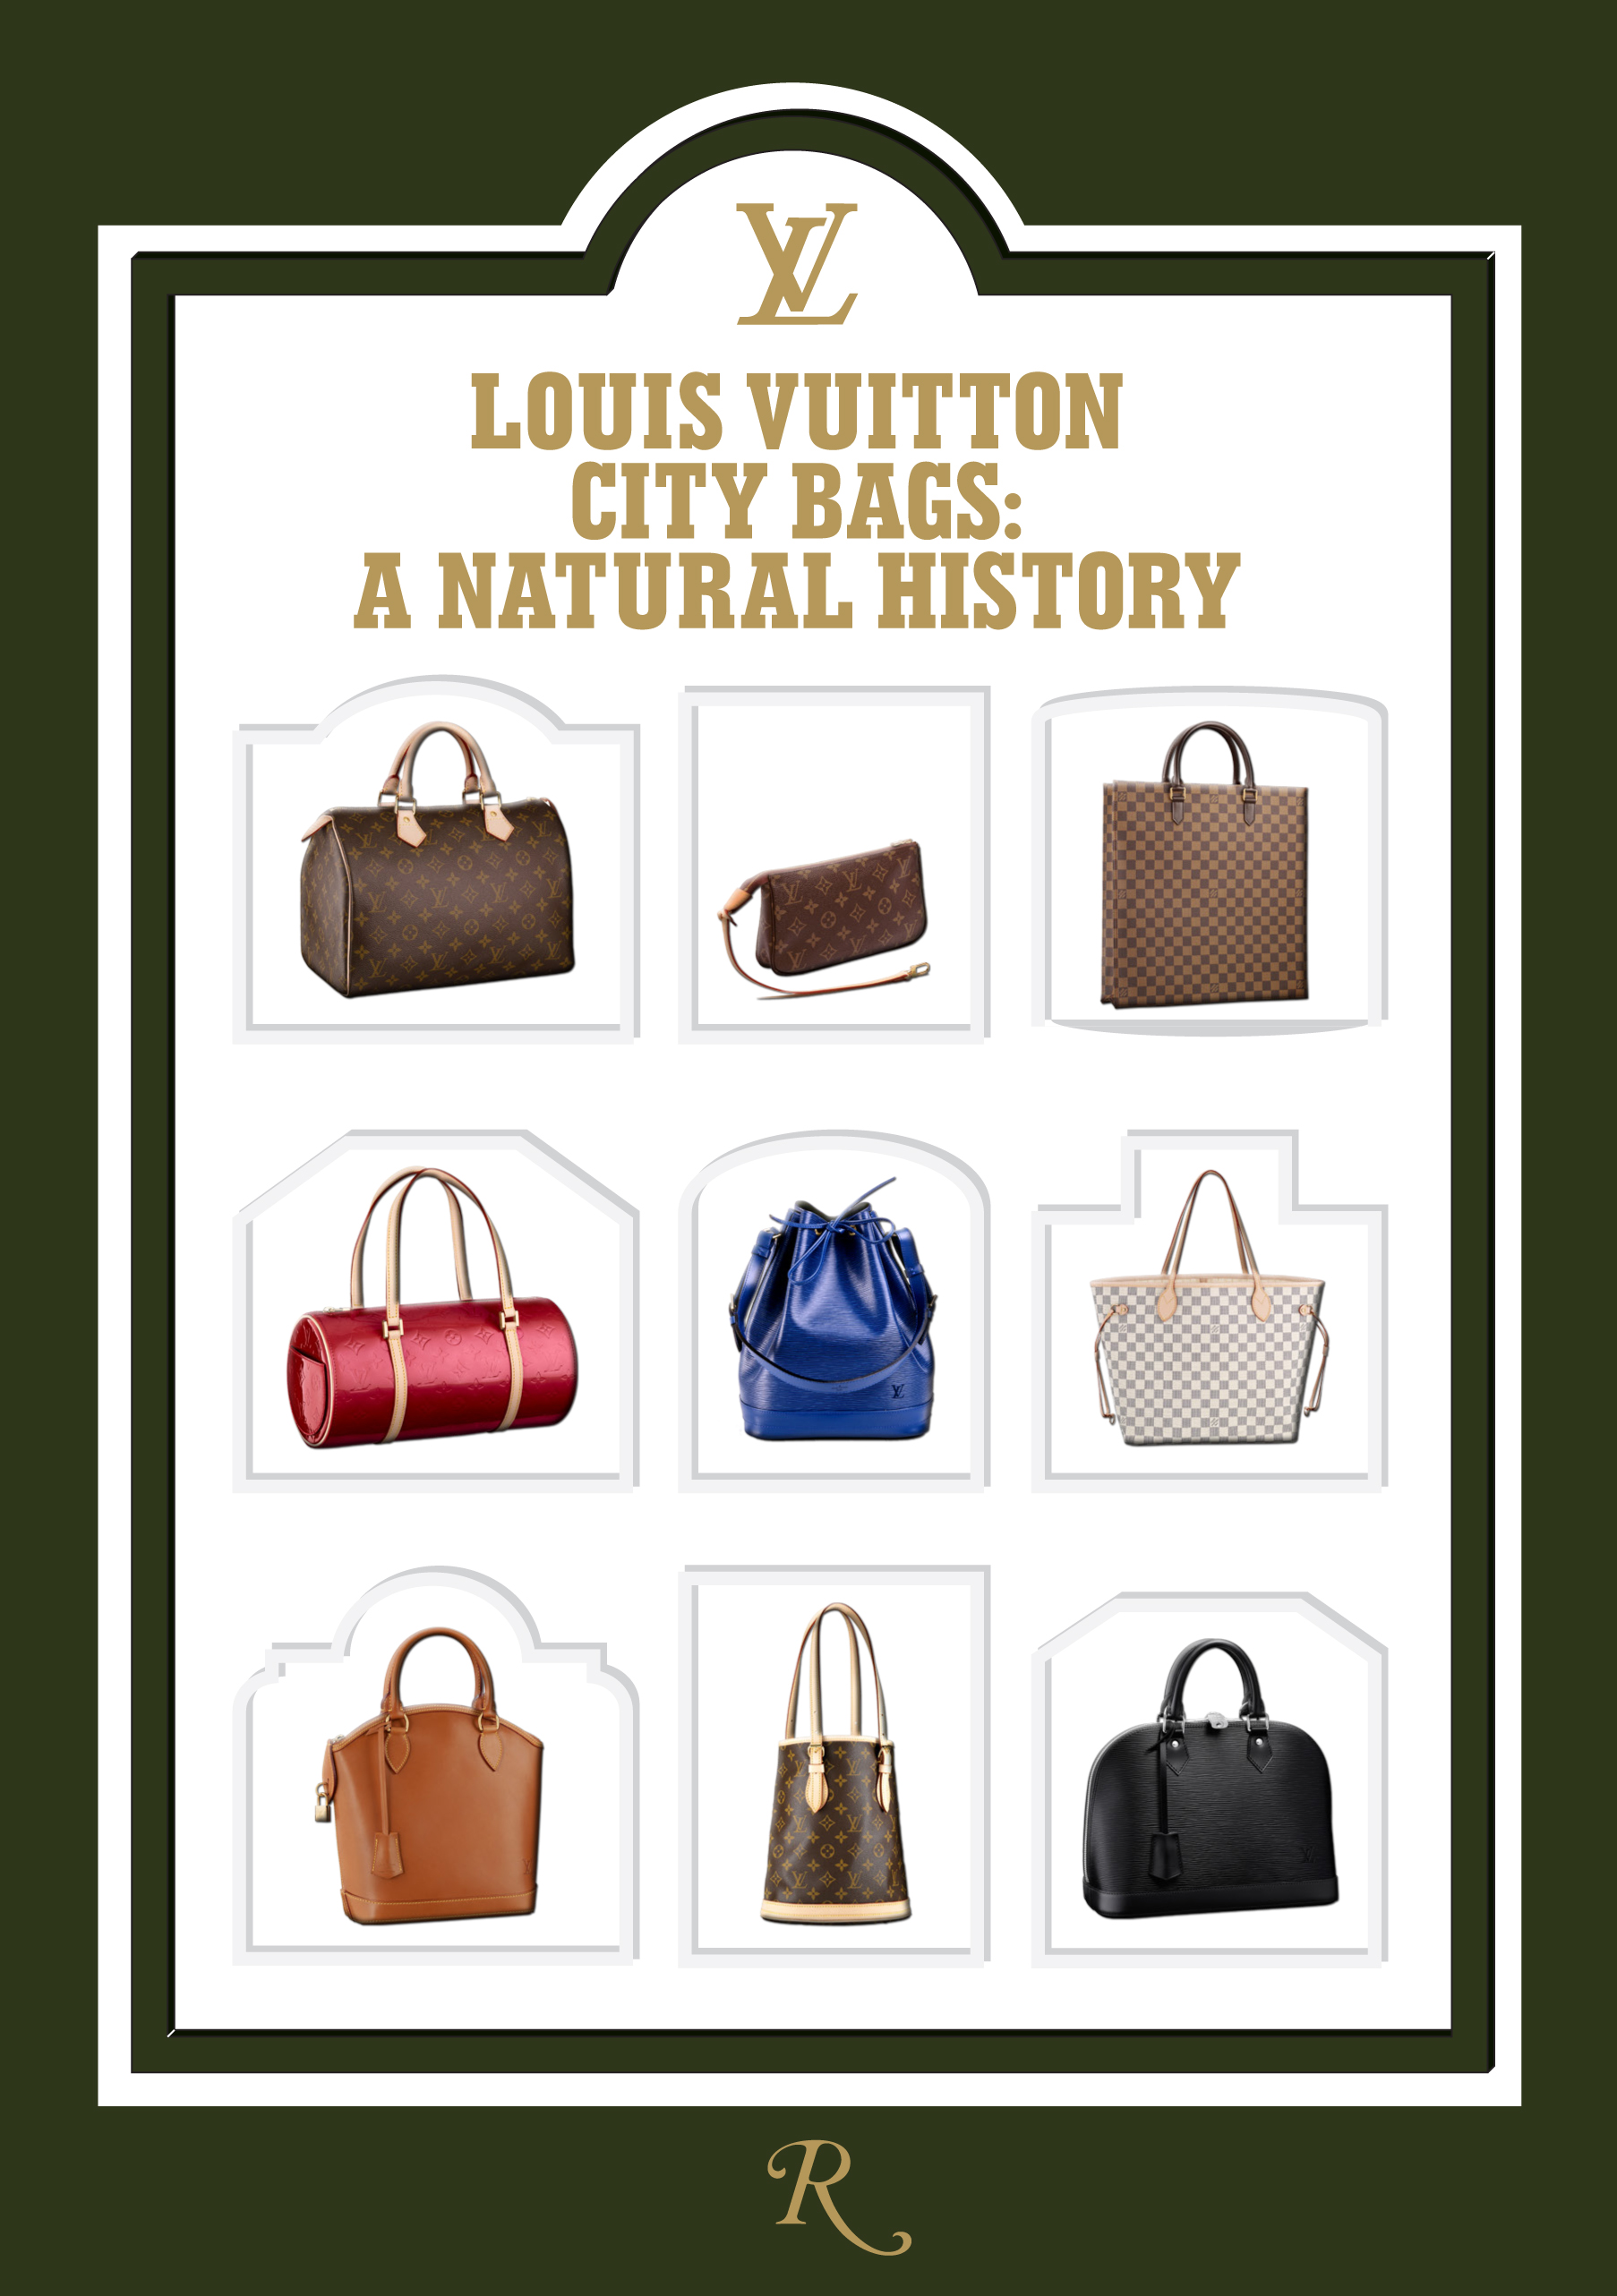 Louis Vuitton City Bags: A Natural History by